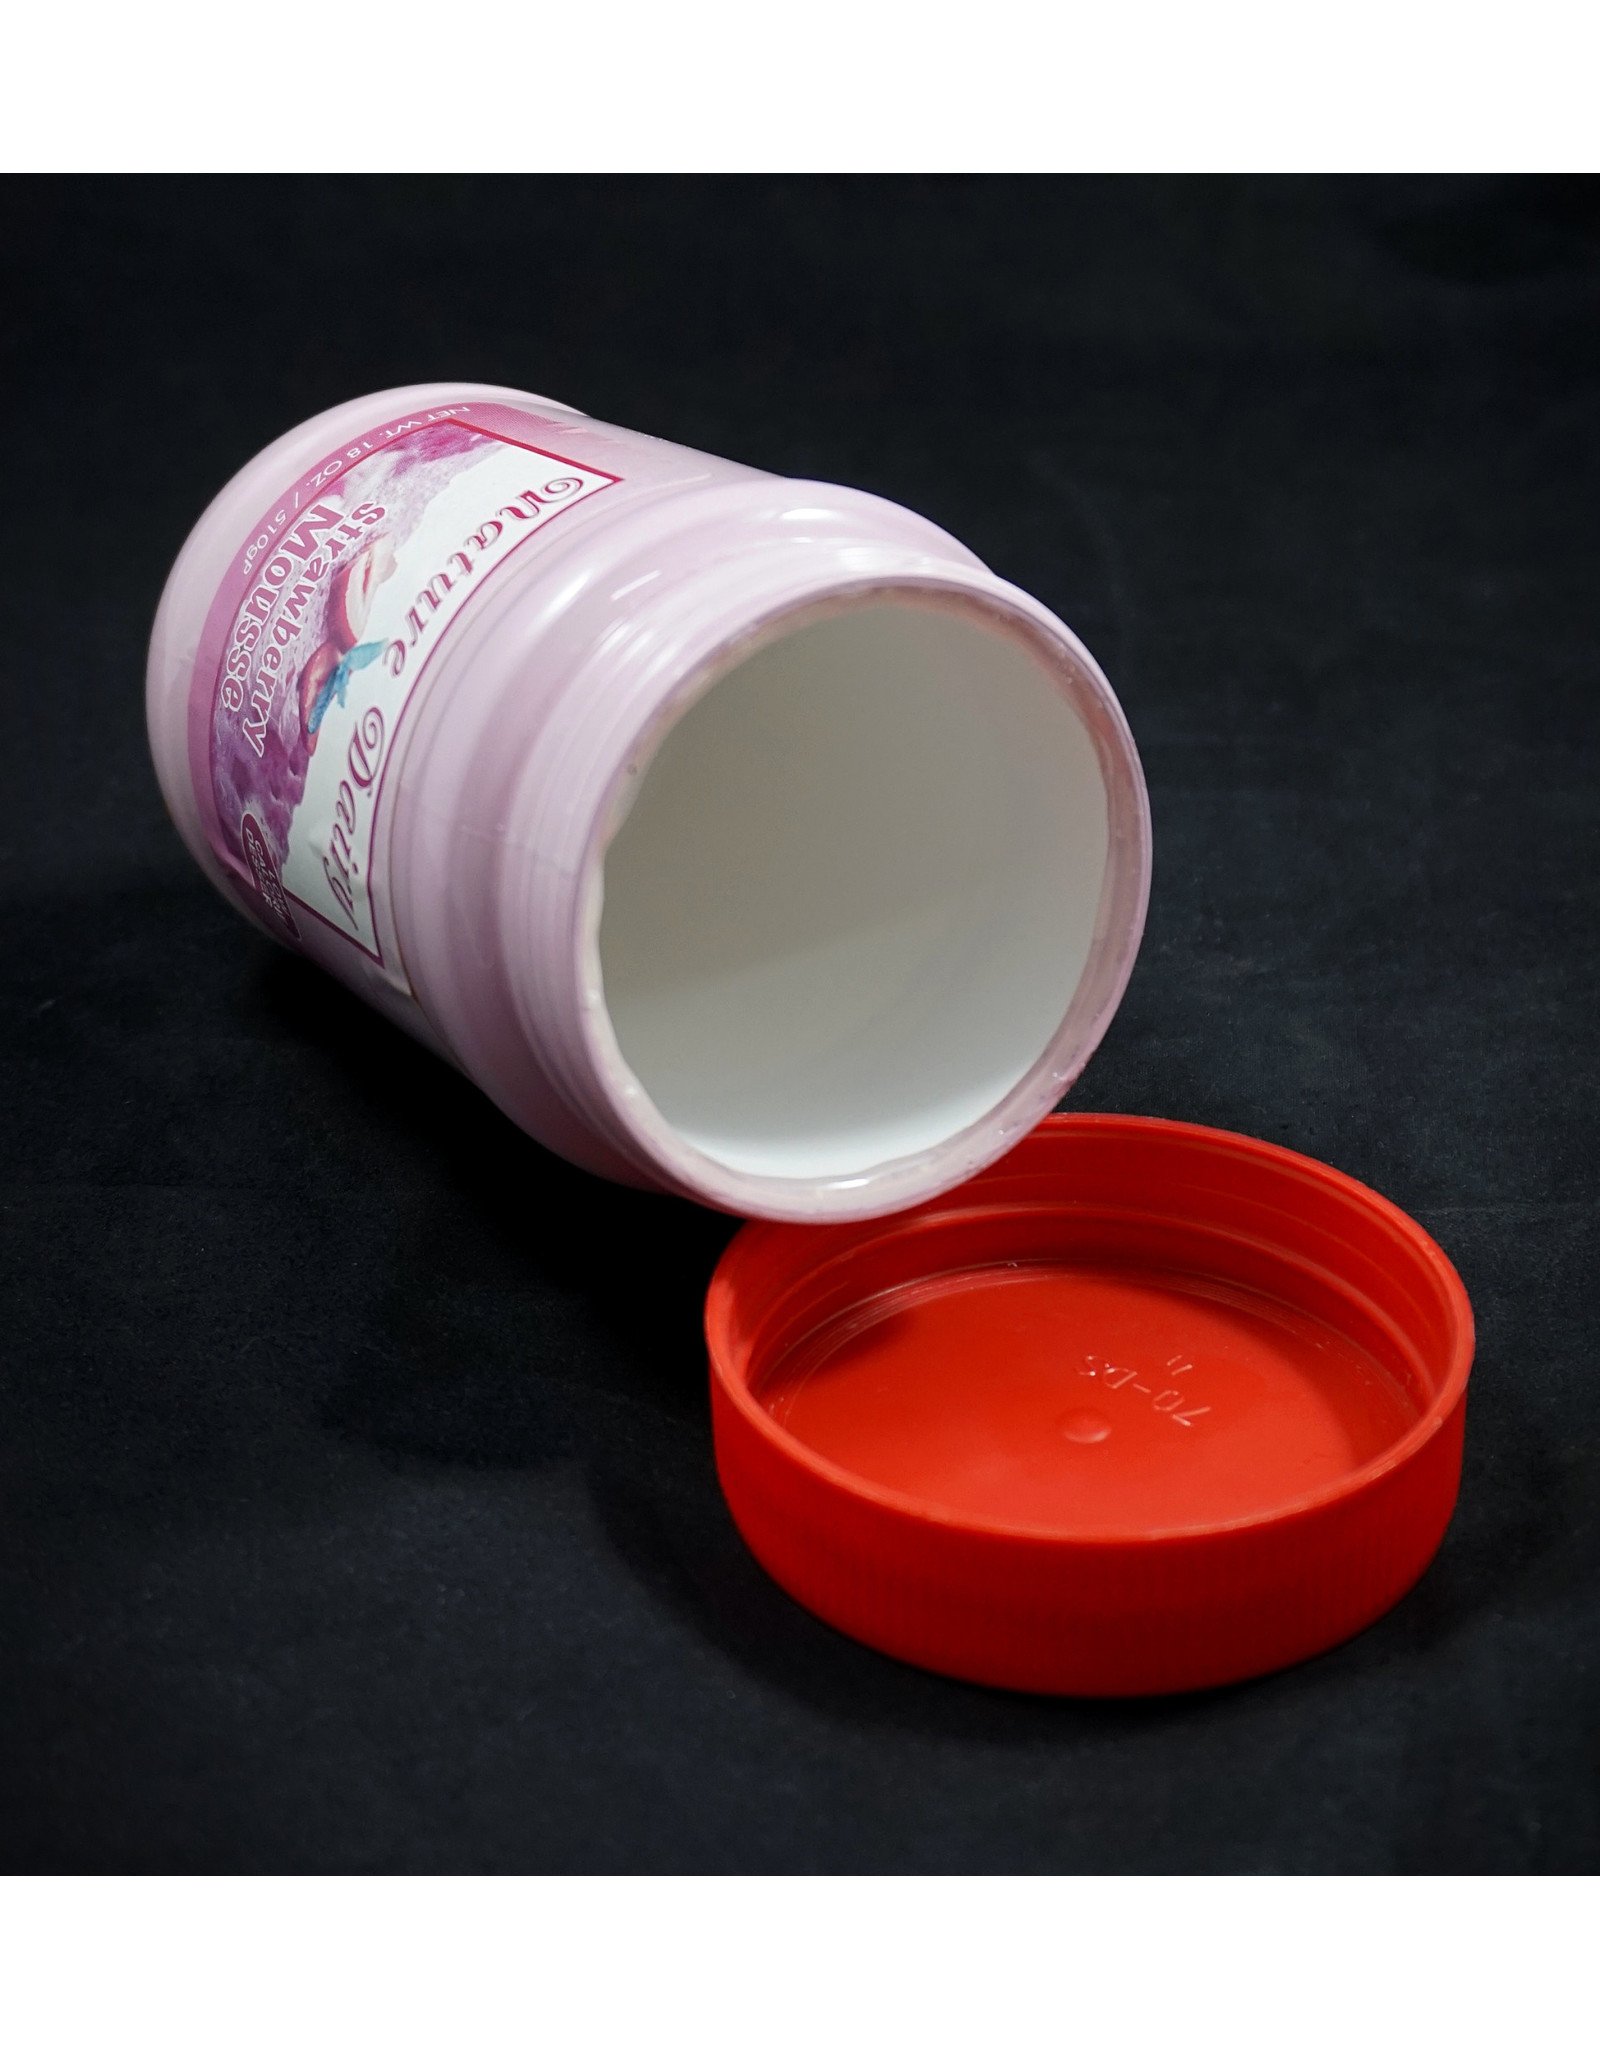 Nature Dairy Strawberry Mousse Diversion Safe